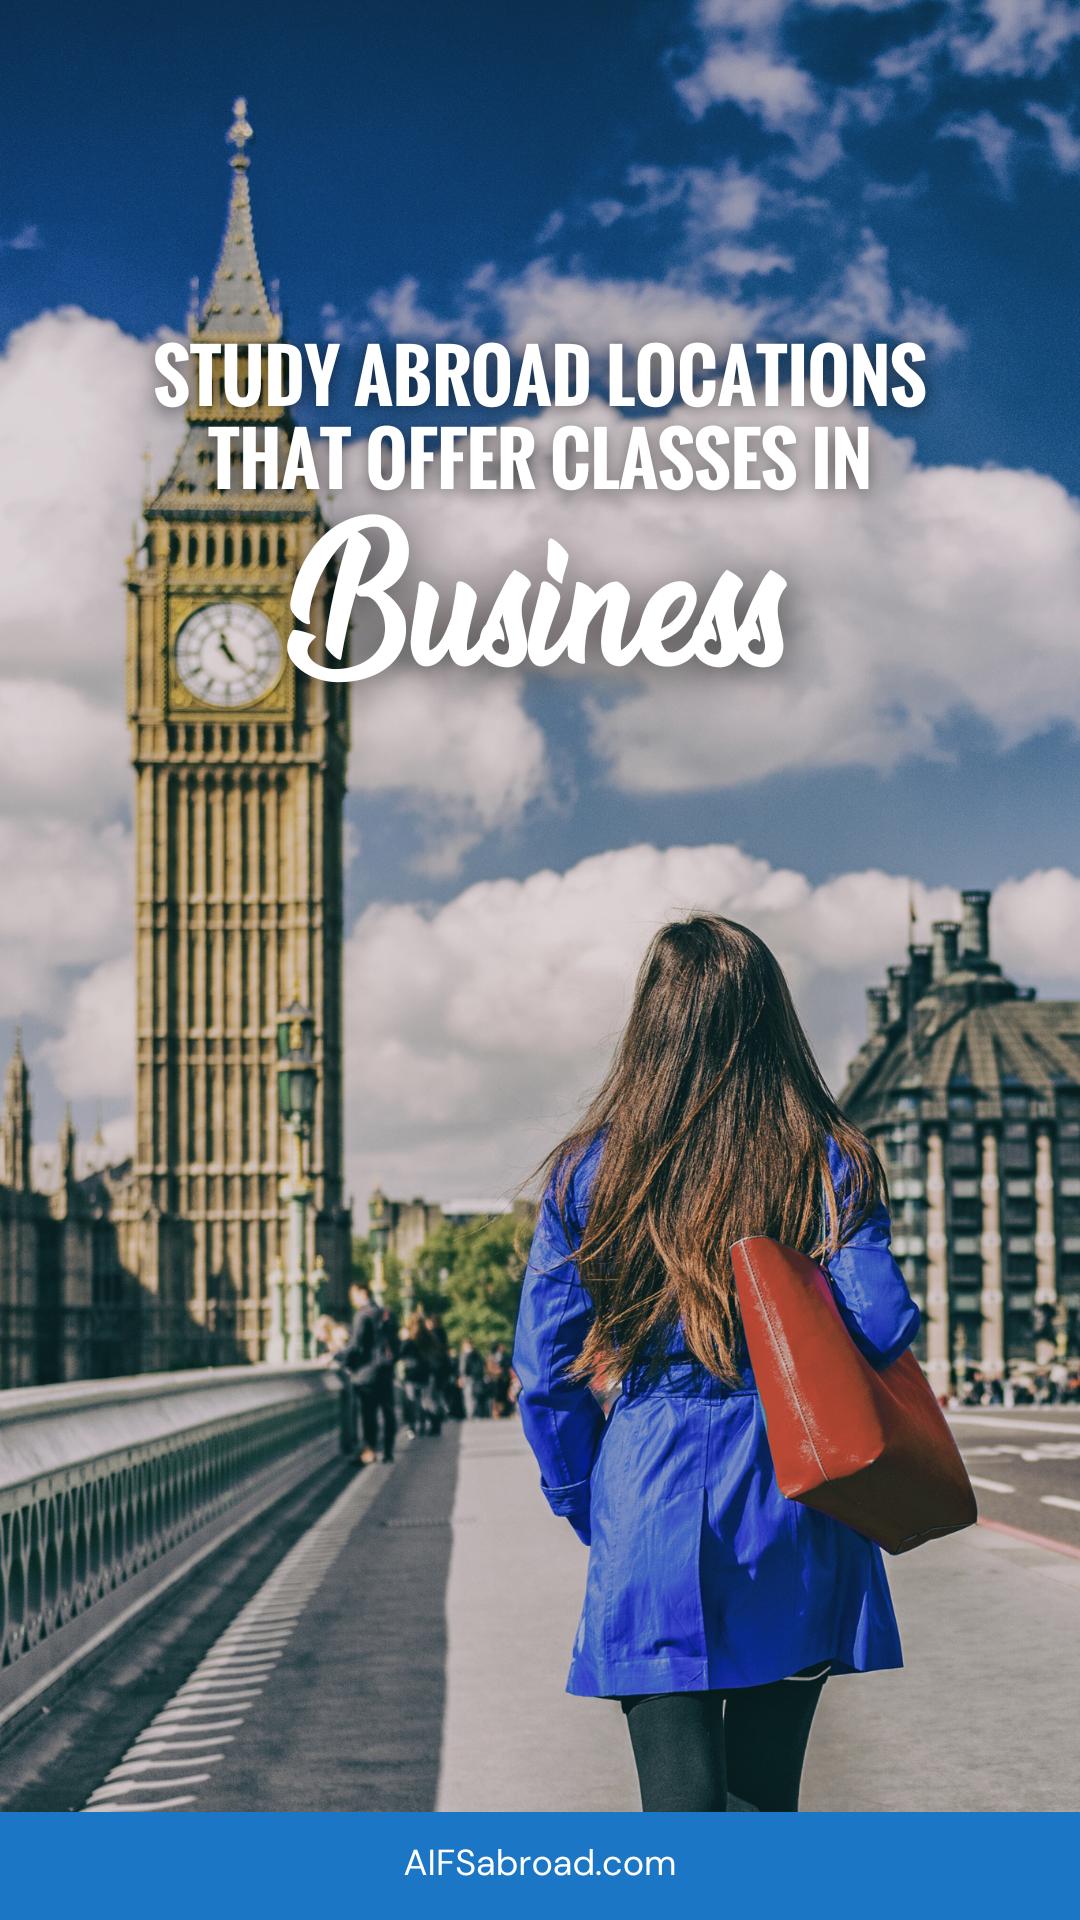 Pin Image - Young professional woman walking in London, England near Big Ben with text overlay, "Study Abroad Program Locations with Business Classes - AIFS Abroad"